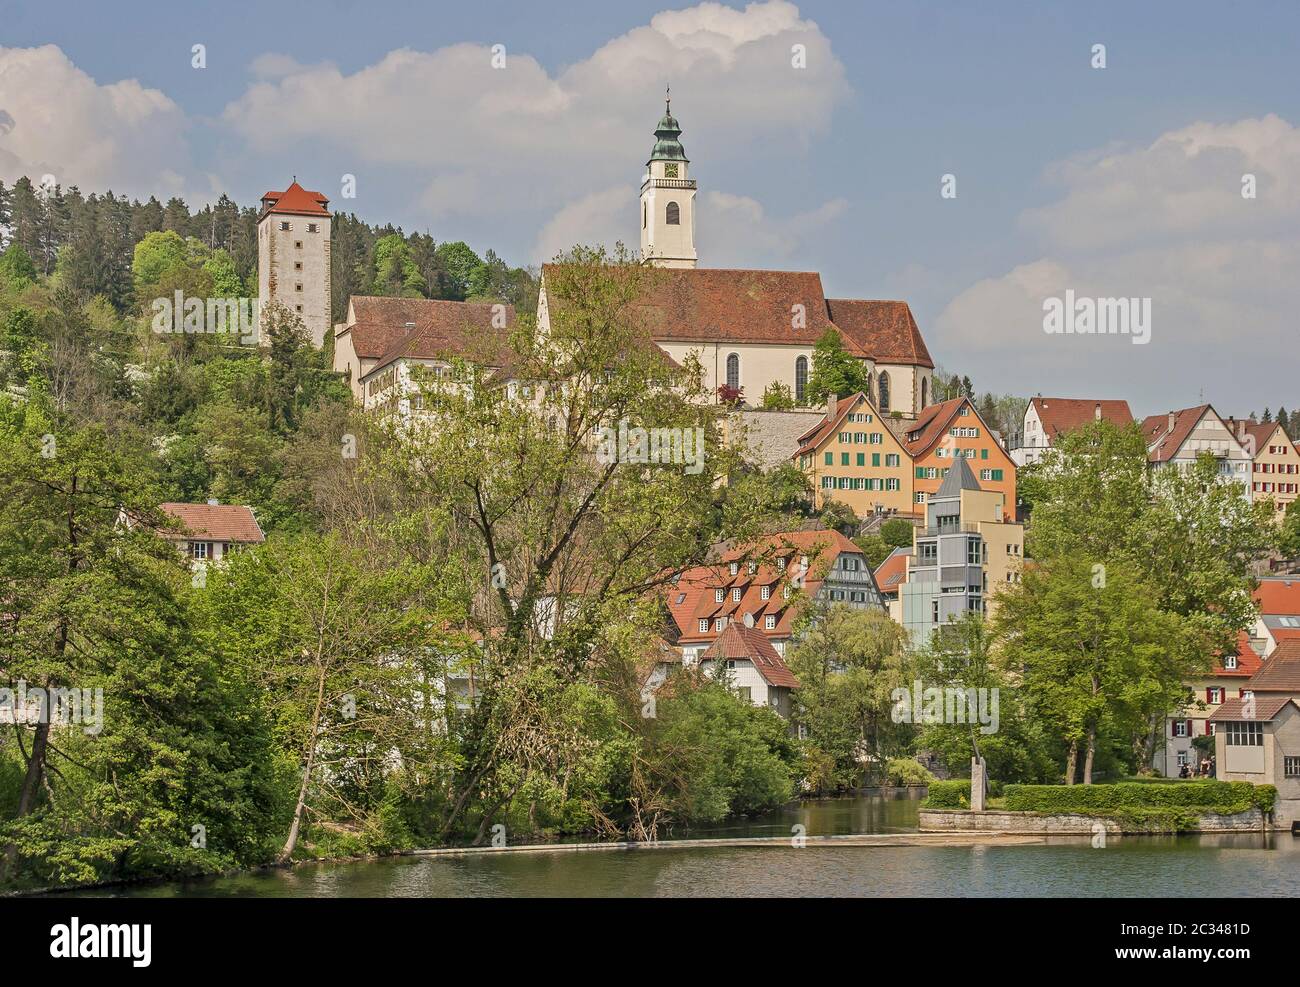 Horb am Neckar with rogue tower and Holy Cross collegiate church Stock Photo